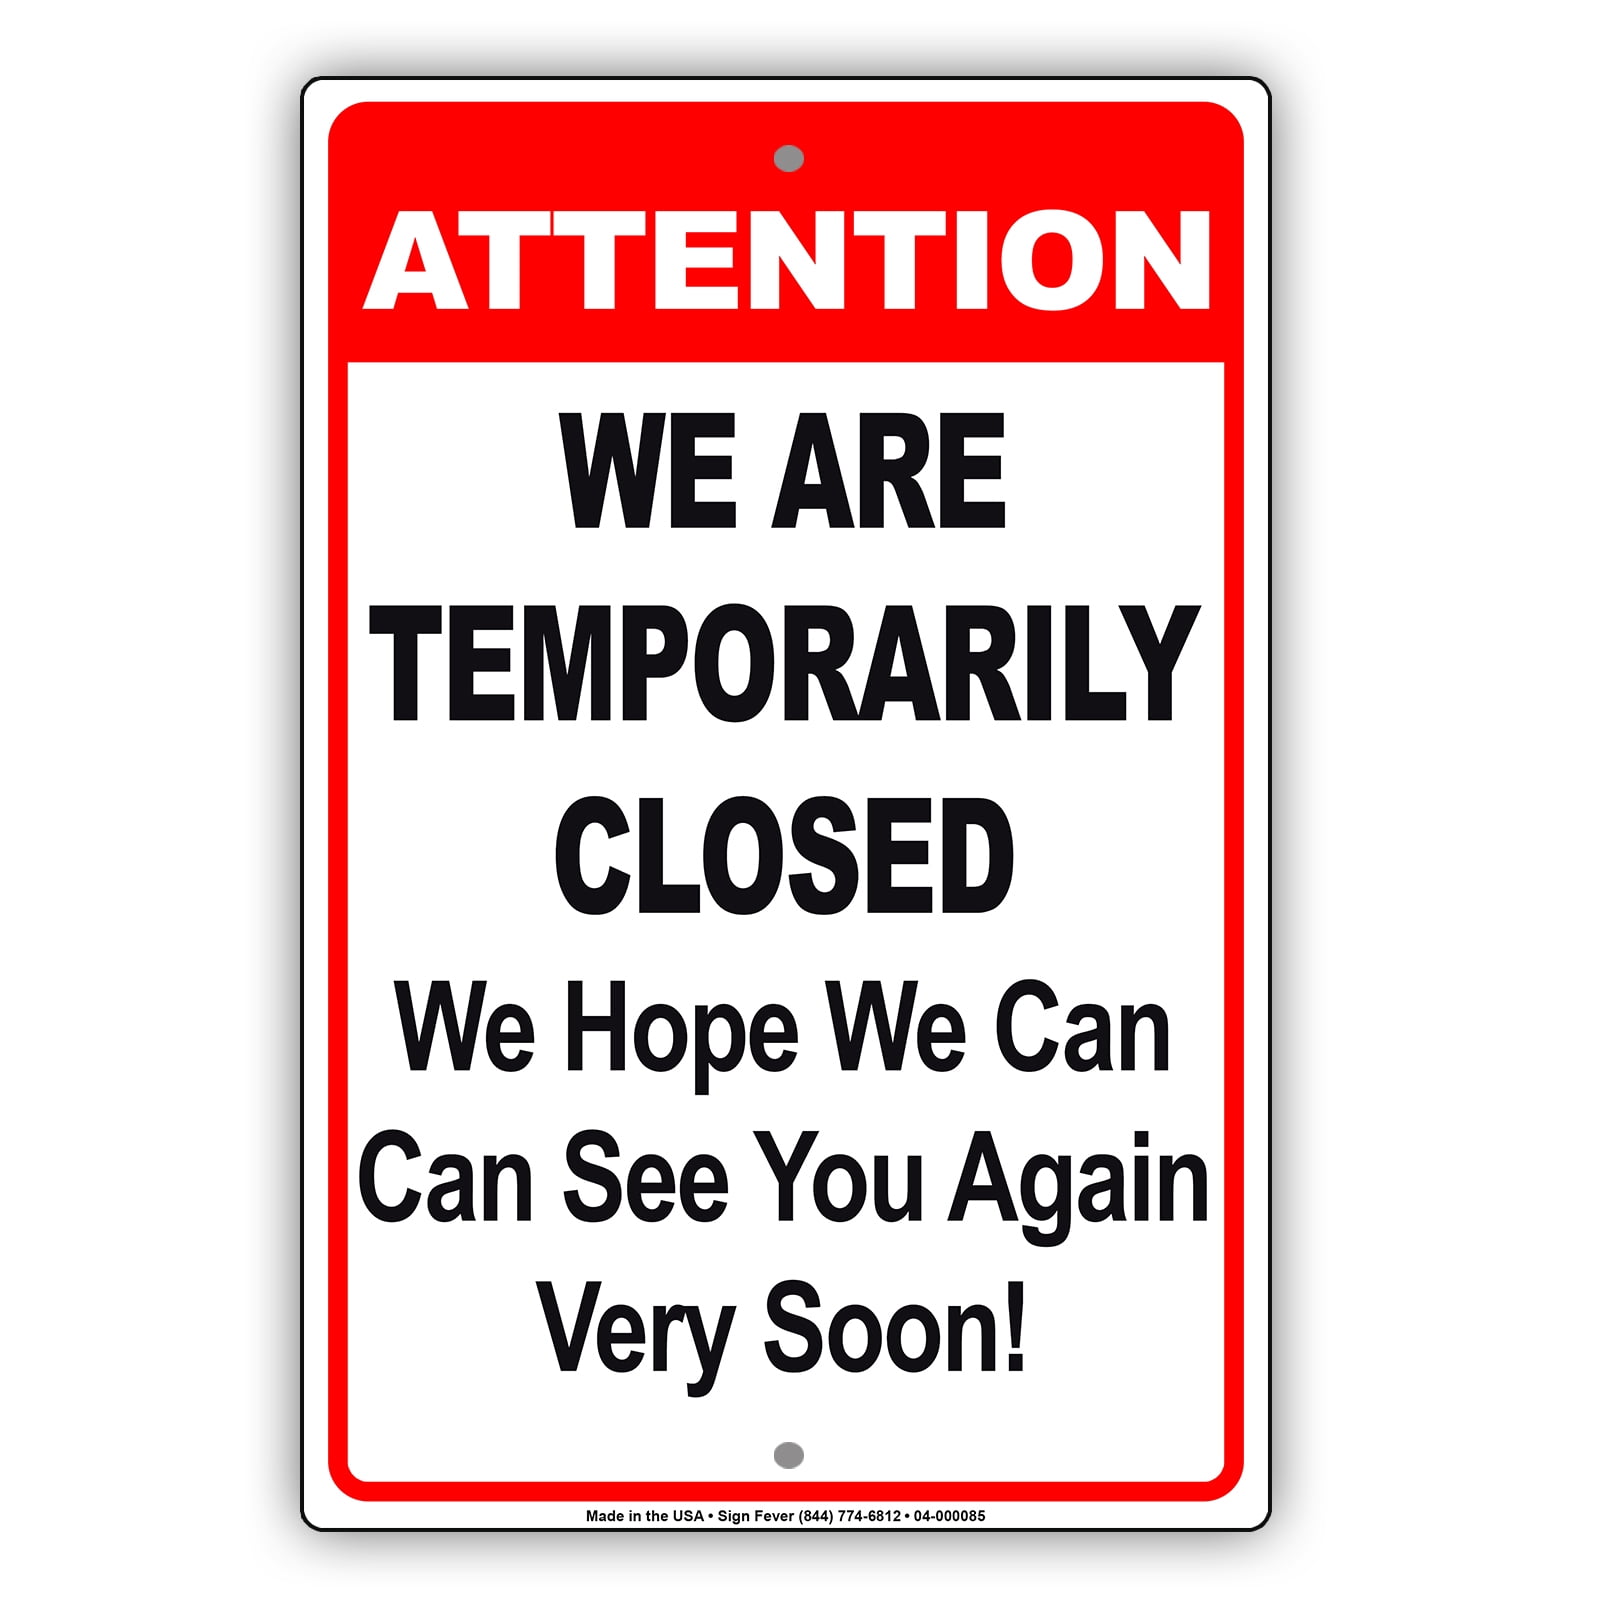 Sorry Temporarily Closed Sign